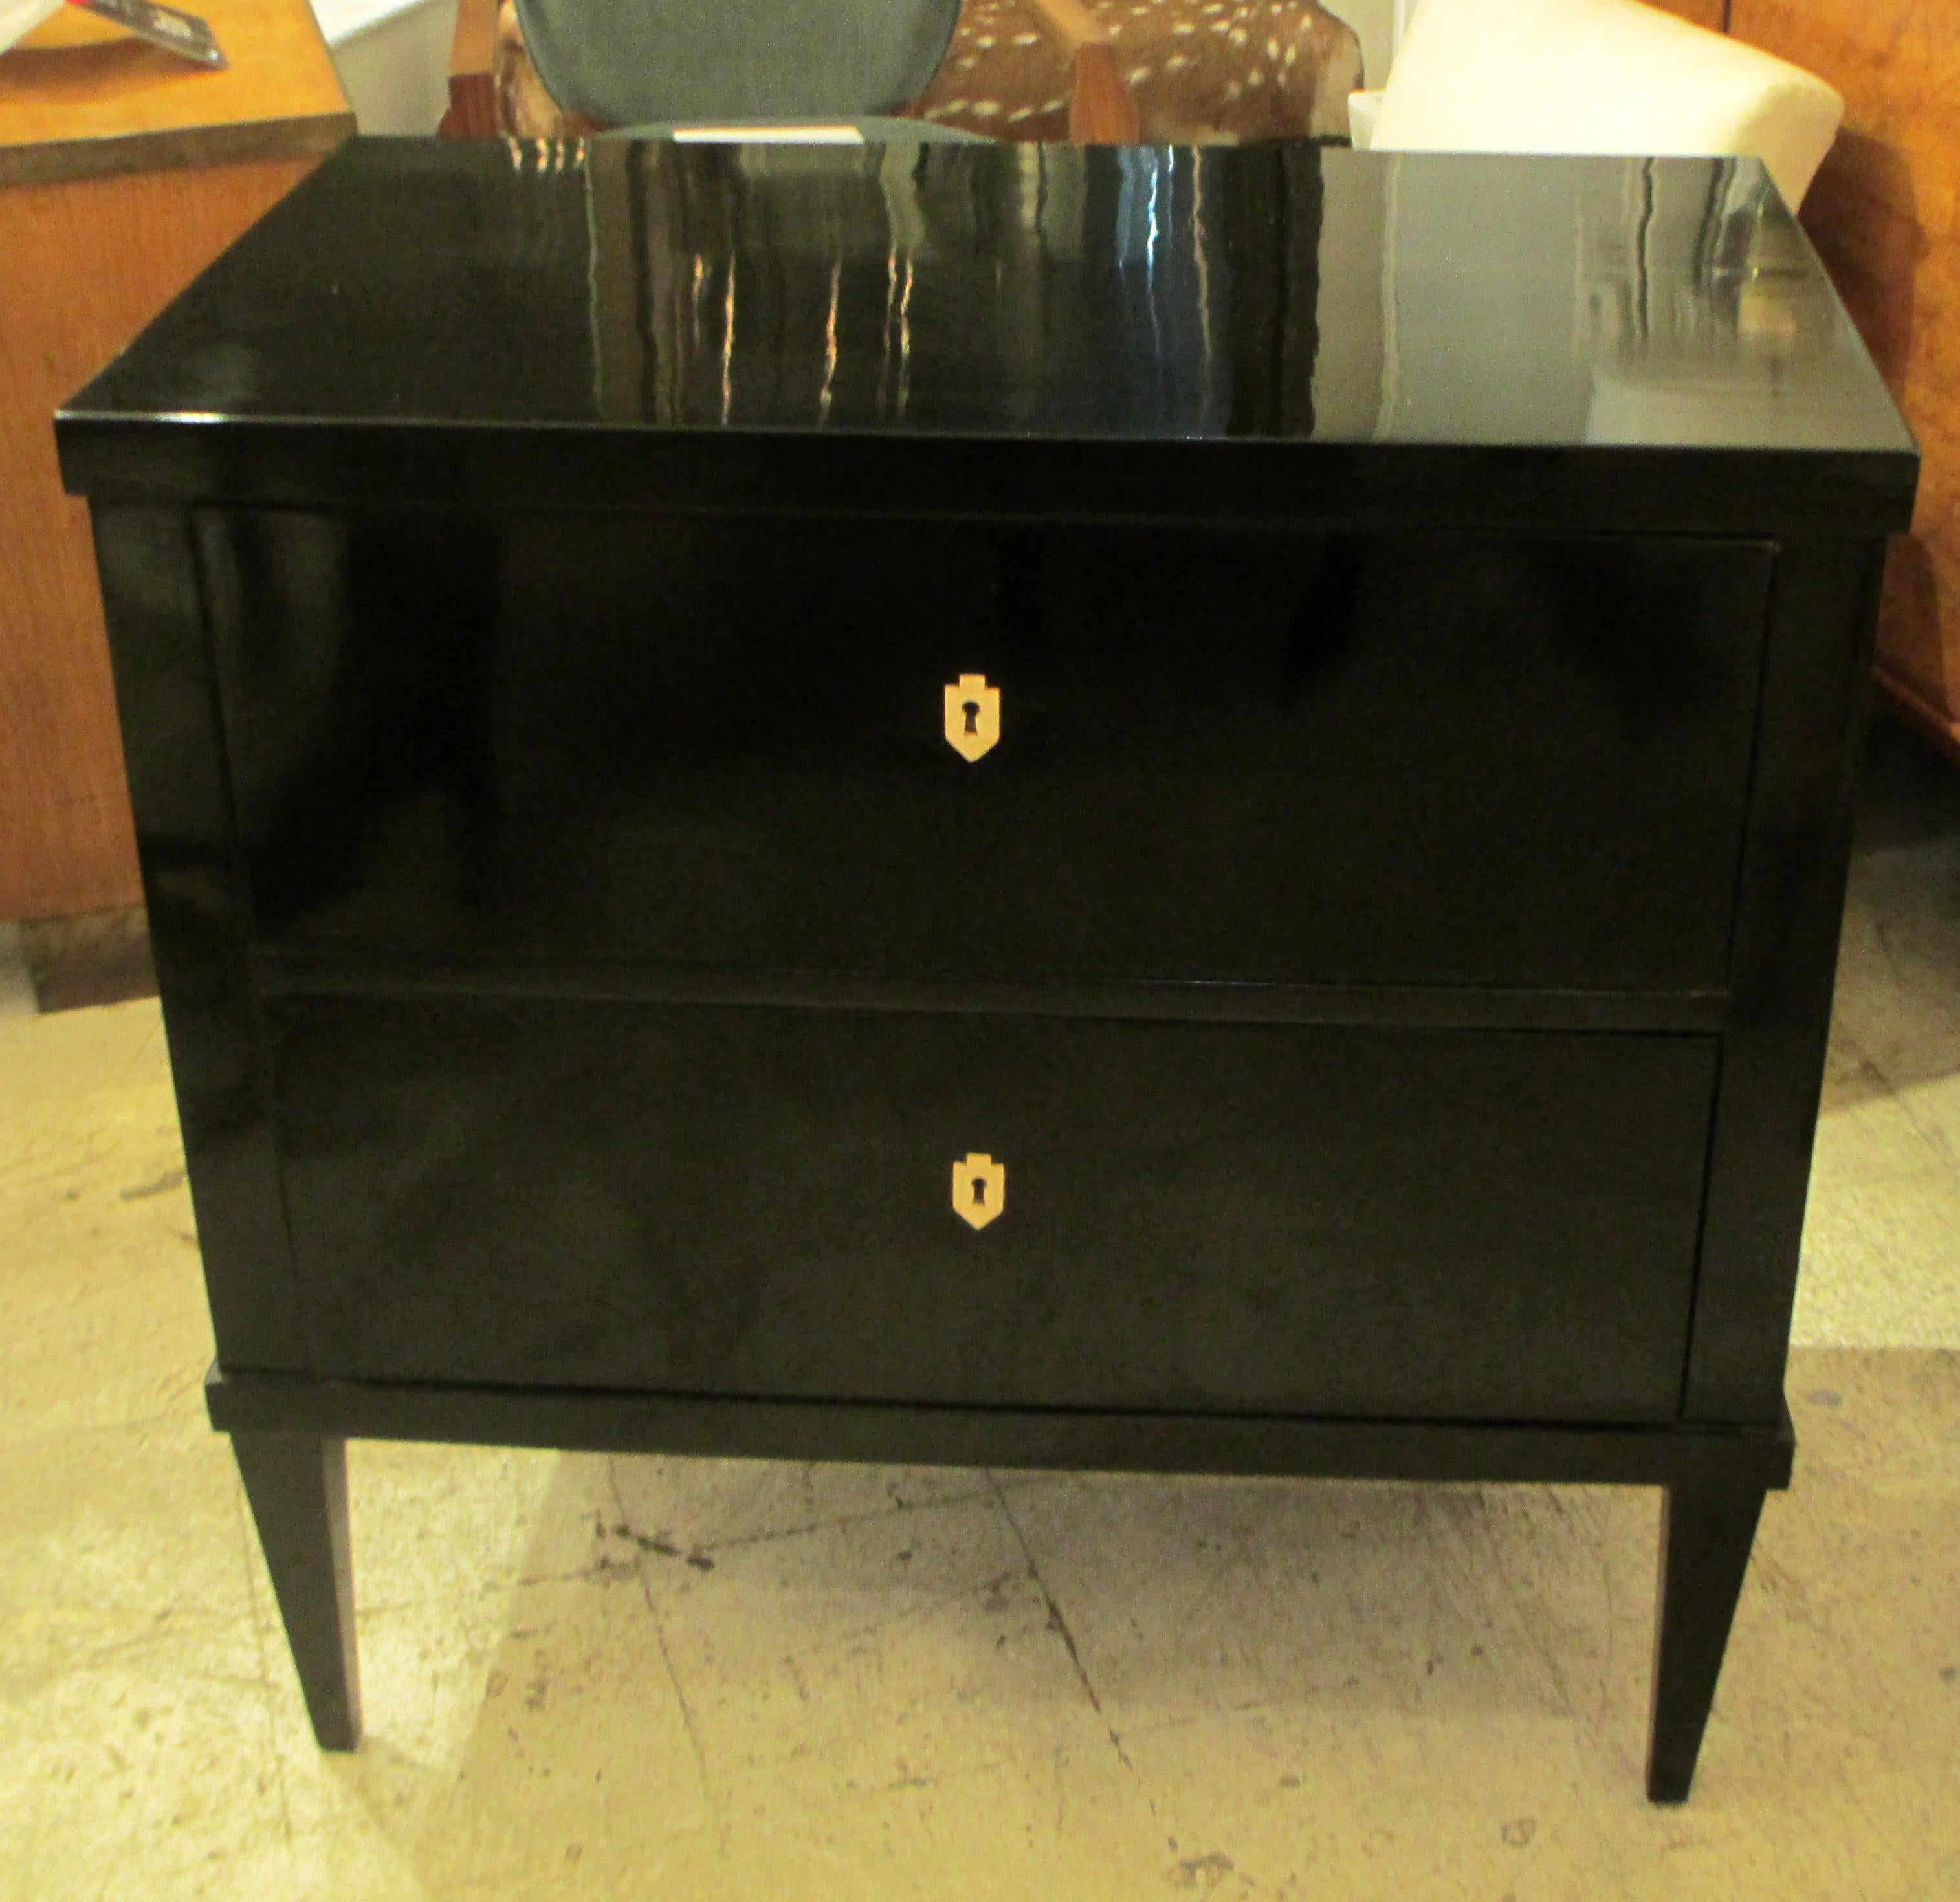 Custom ebonized Louis XVI style chest/commode on tapered legs with ebony escutcheons. Please note that this chest is customizable and can be made in the wood of your choice- cerused oak, mahogany, walnut, lacquered in any color. Please inquire about